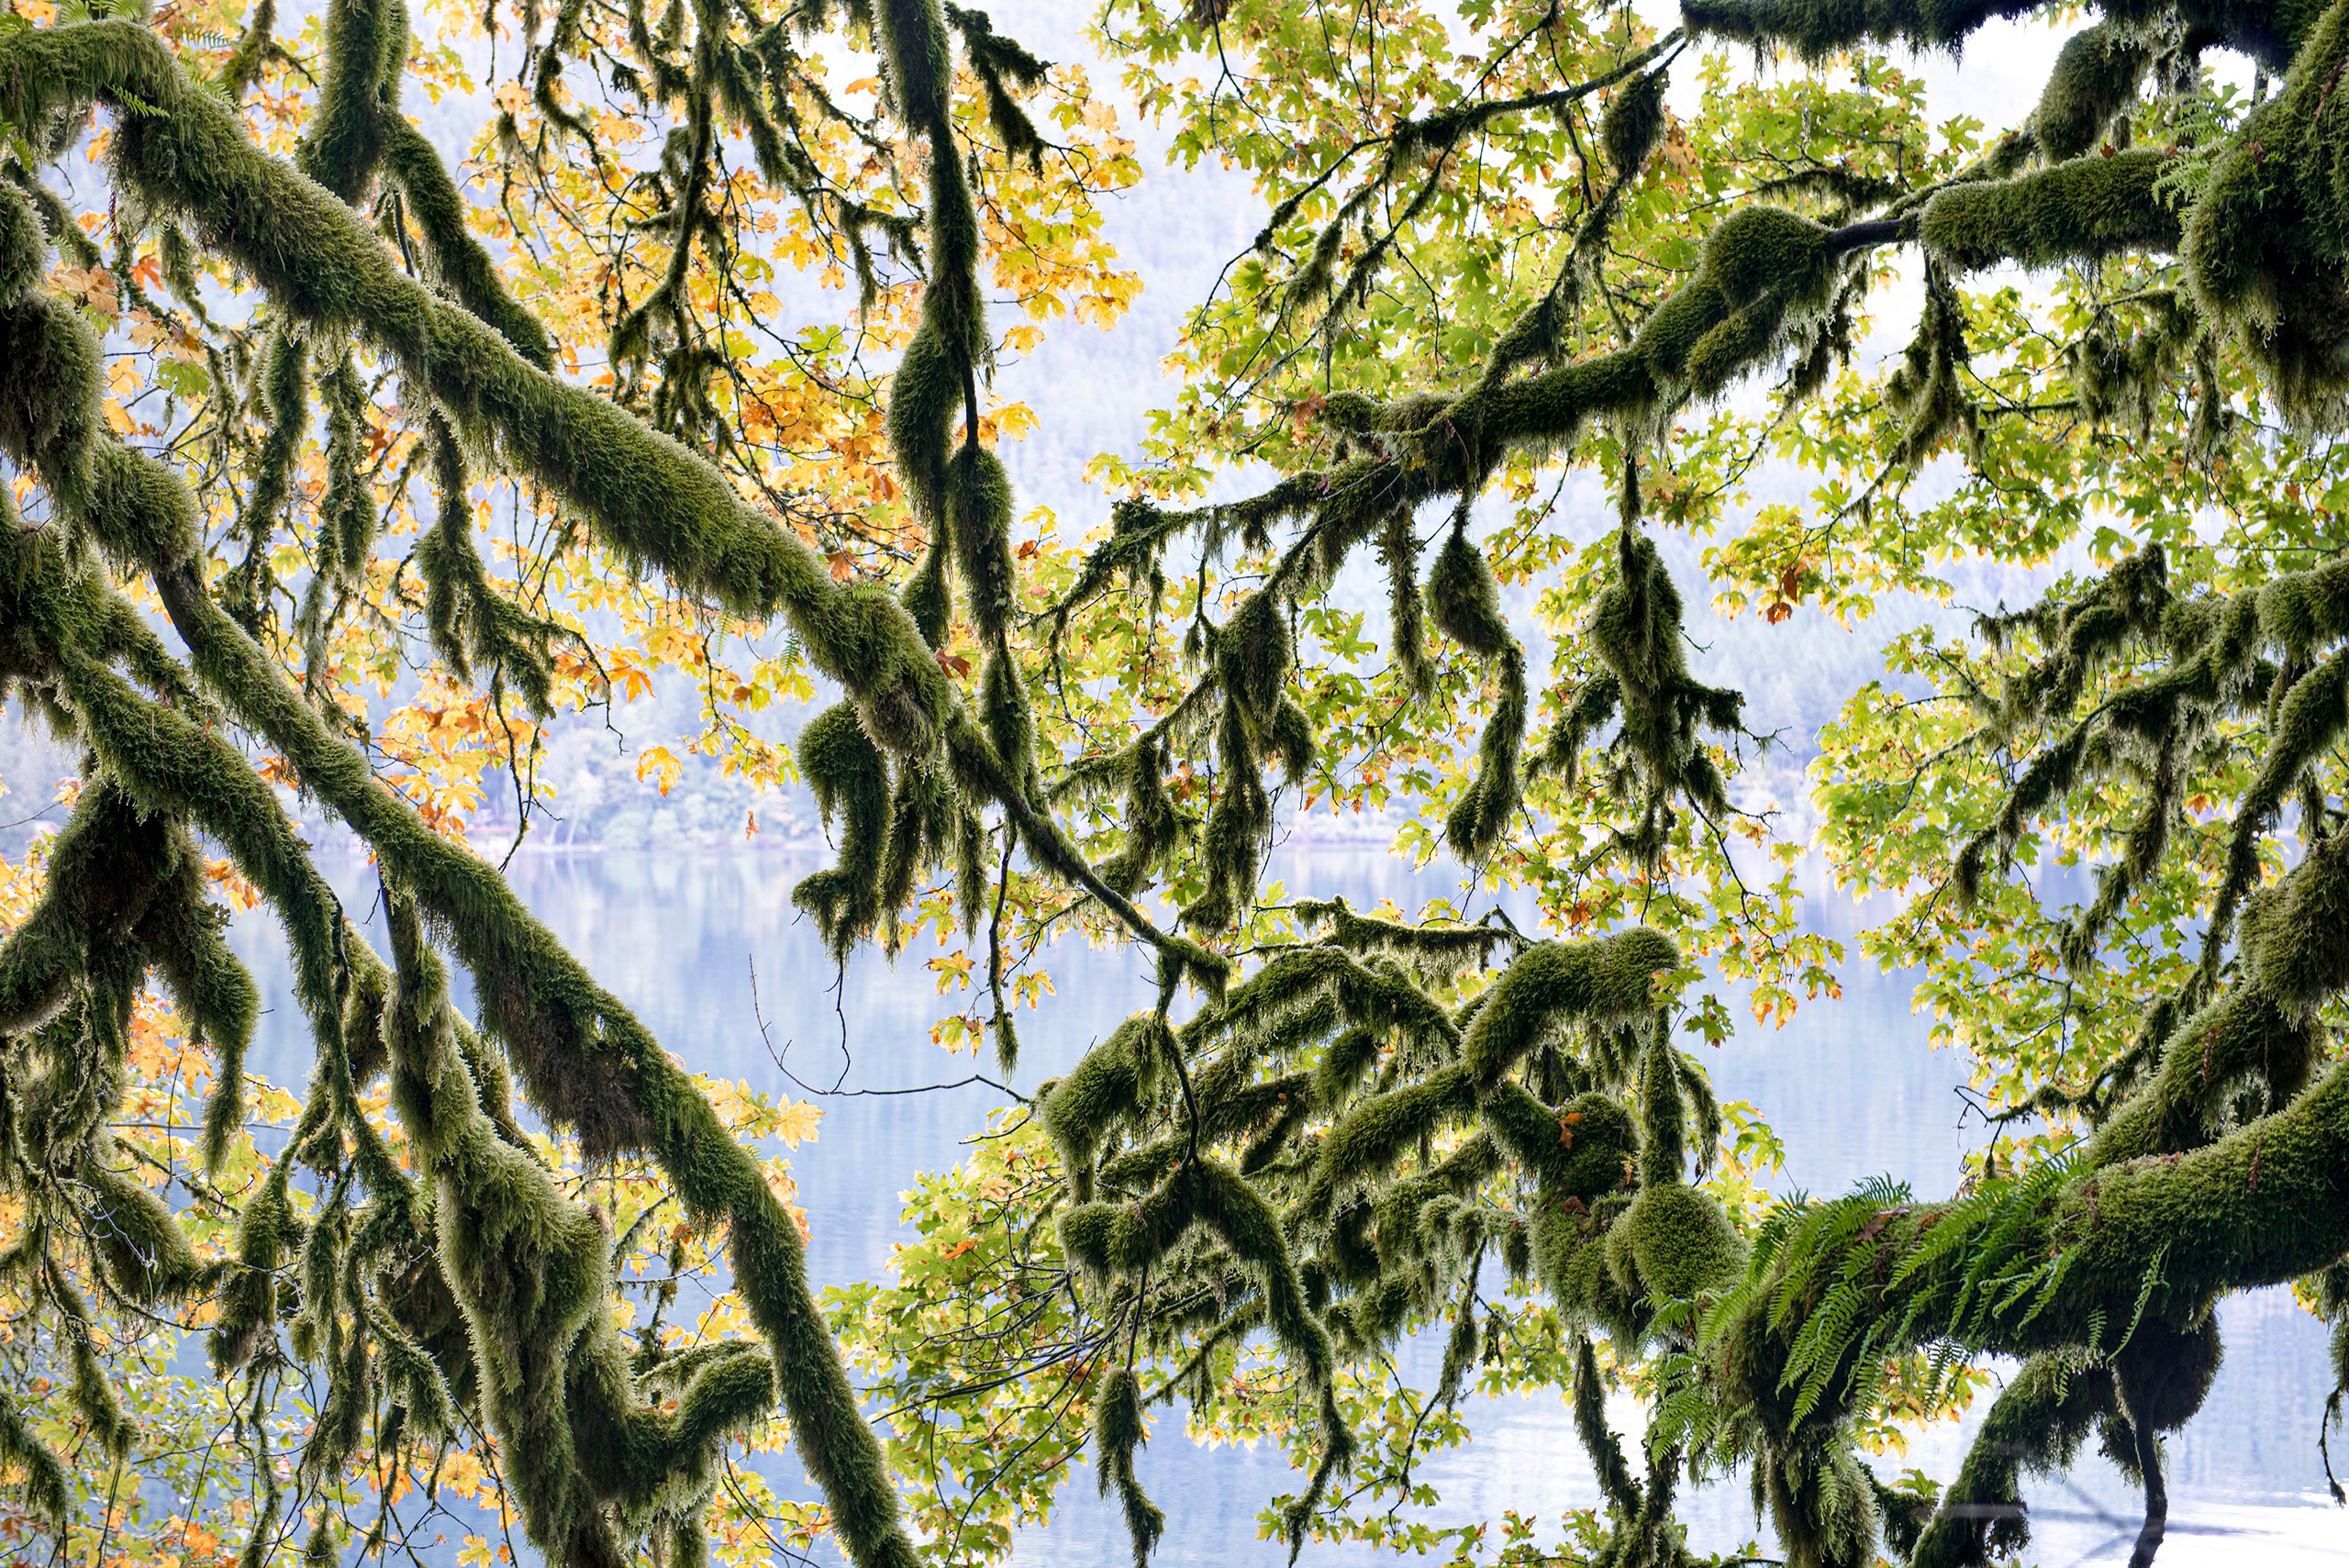 Moss-Covered Branches, Lake Crescent, Olympic Penninsula, Washington 